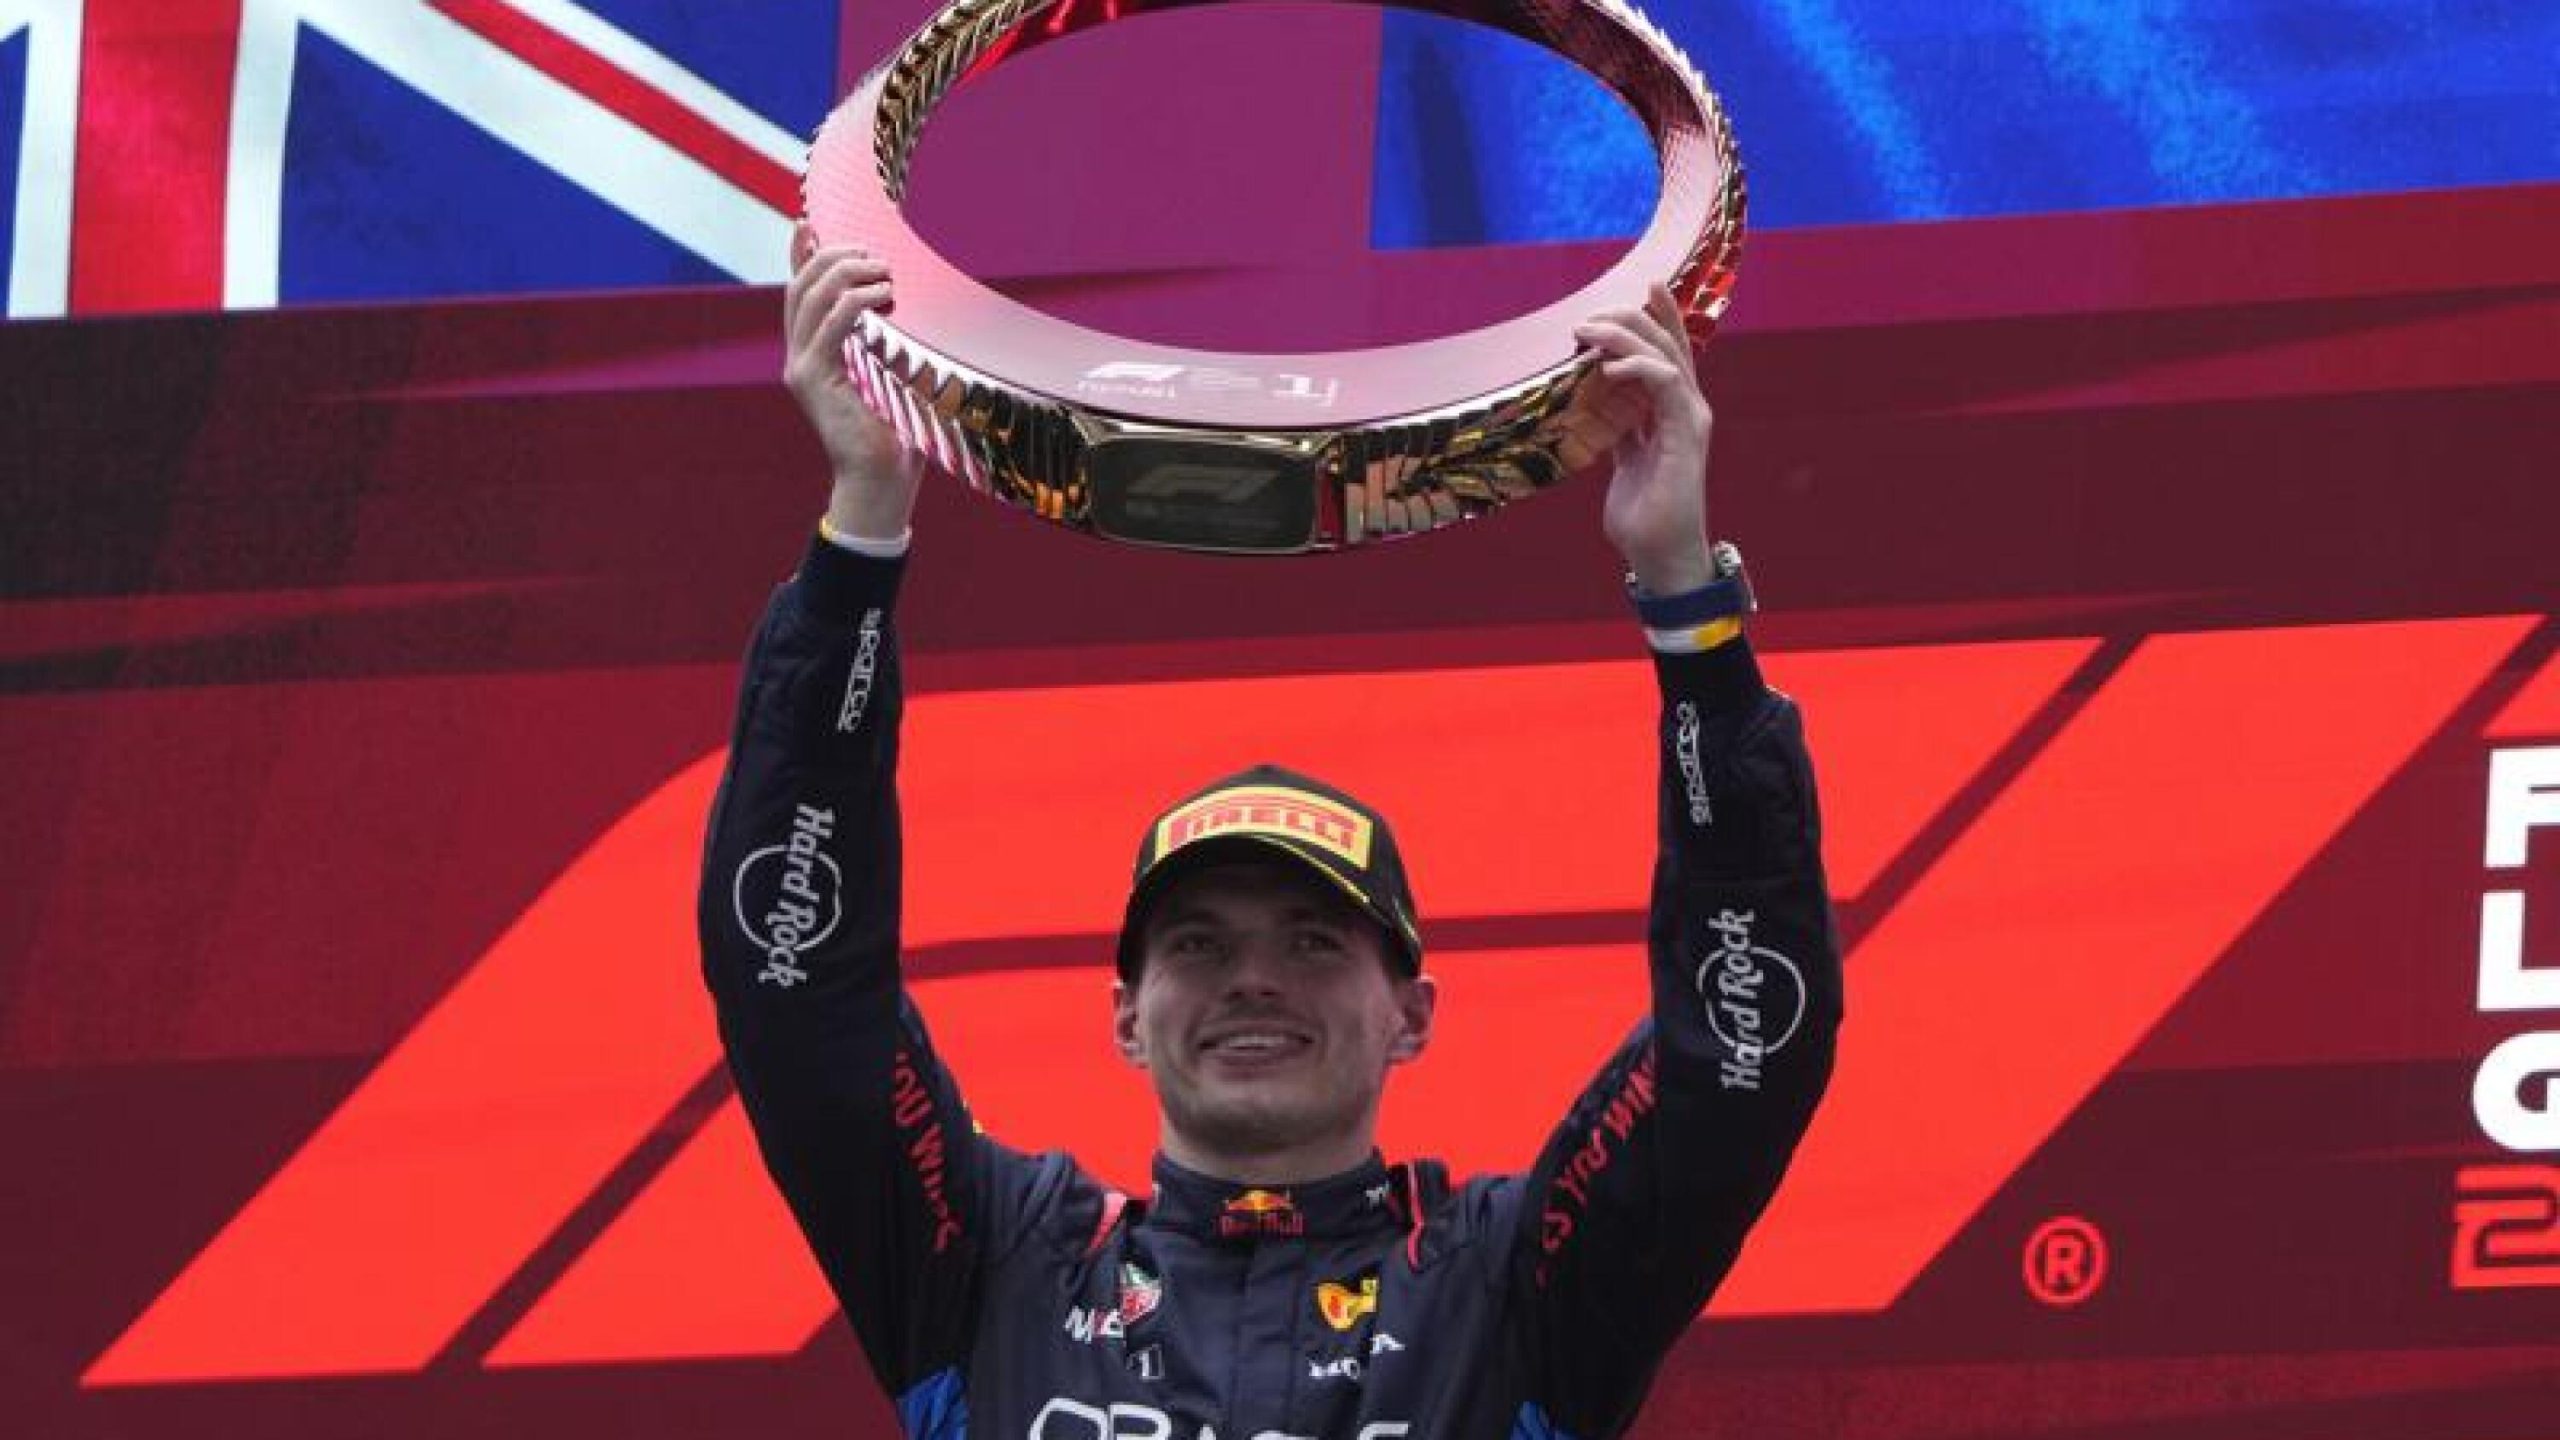 Verstappen Clinches Victory in Action-Packed Chinese Grand Prix